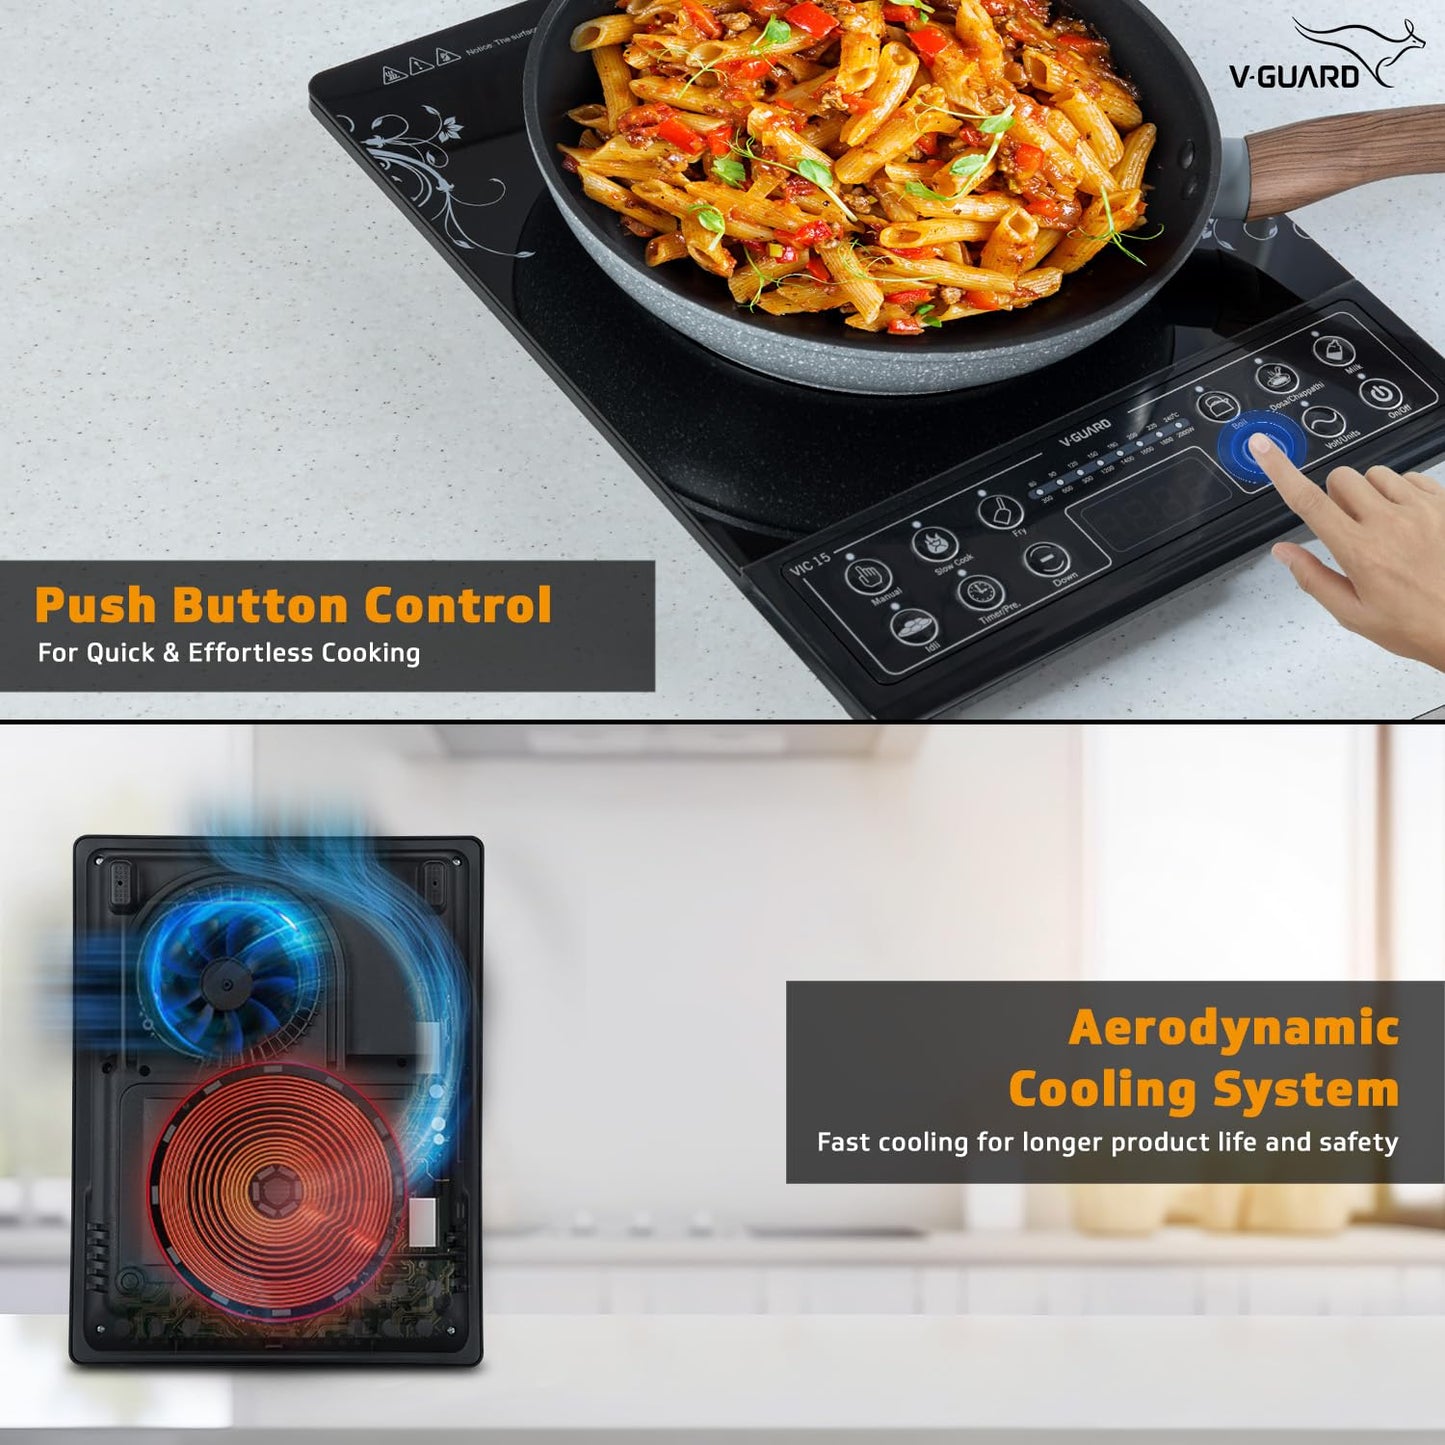 VIC 15 2000 Watt Induction Cooktop with 7 versatile cooking modes